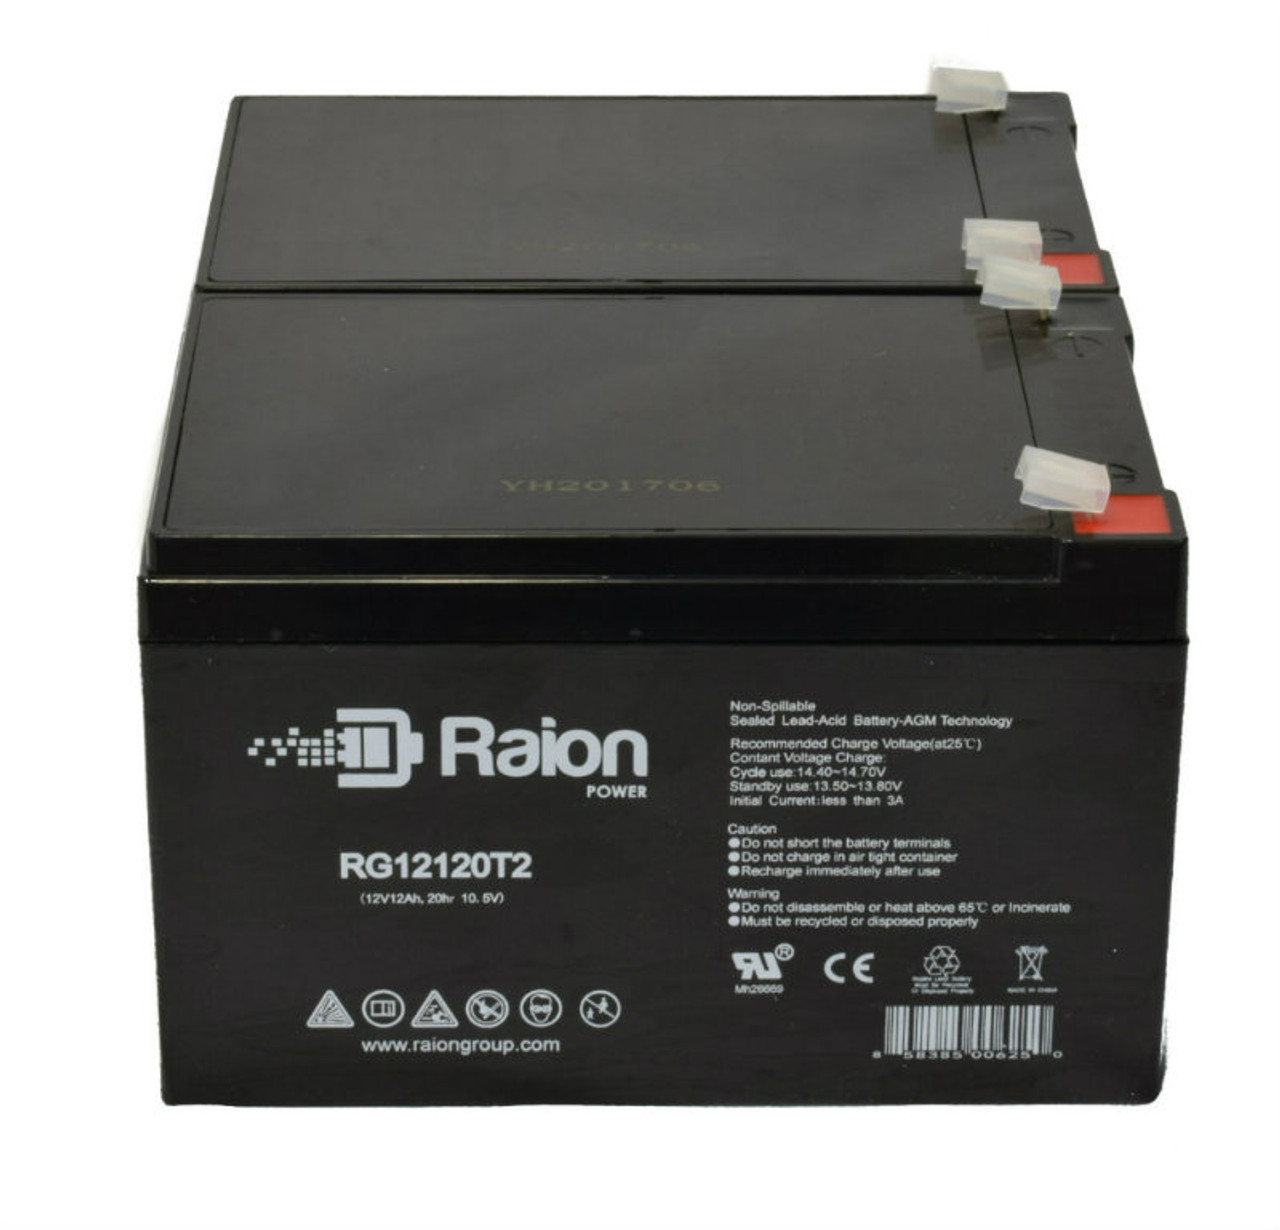 Raion Power 12V 12Ah Non-Spillable Compatible Replacement Battery for Currie Izip IZ-VM-AN - (2 Pack)